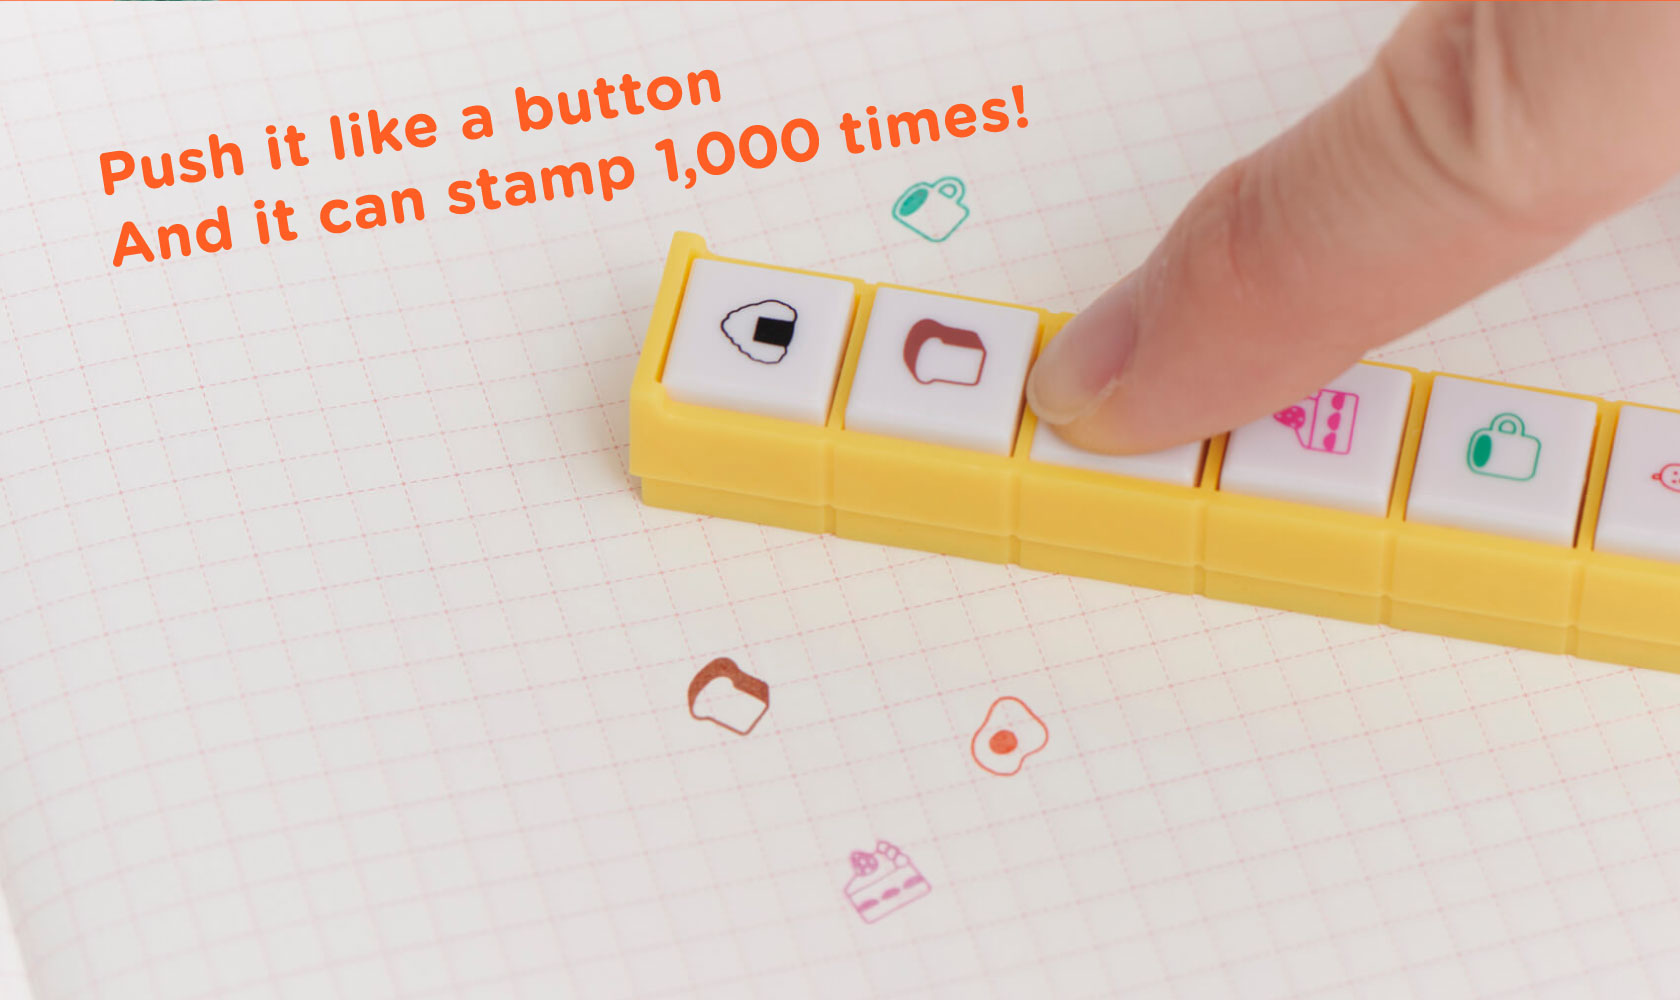 Push it like a button
                    And it can stamp 1,000 times! 